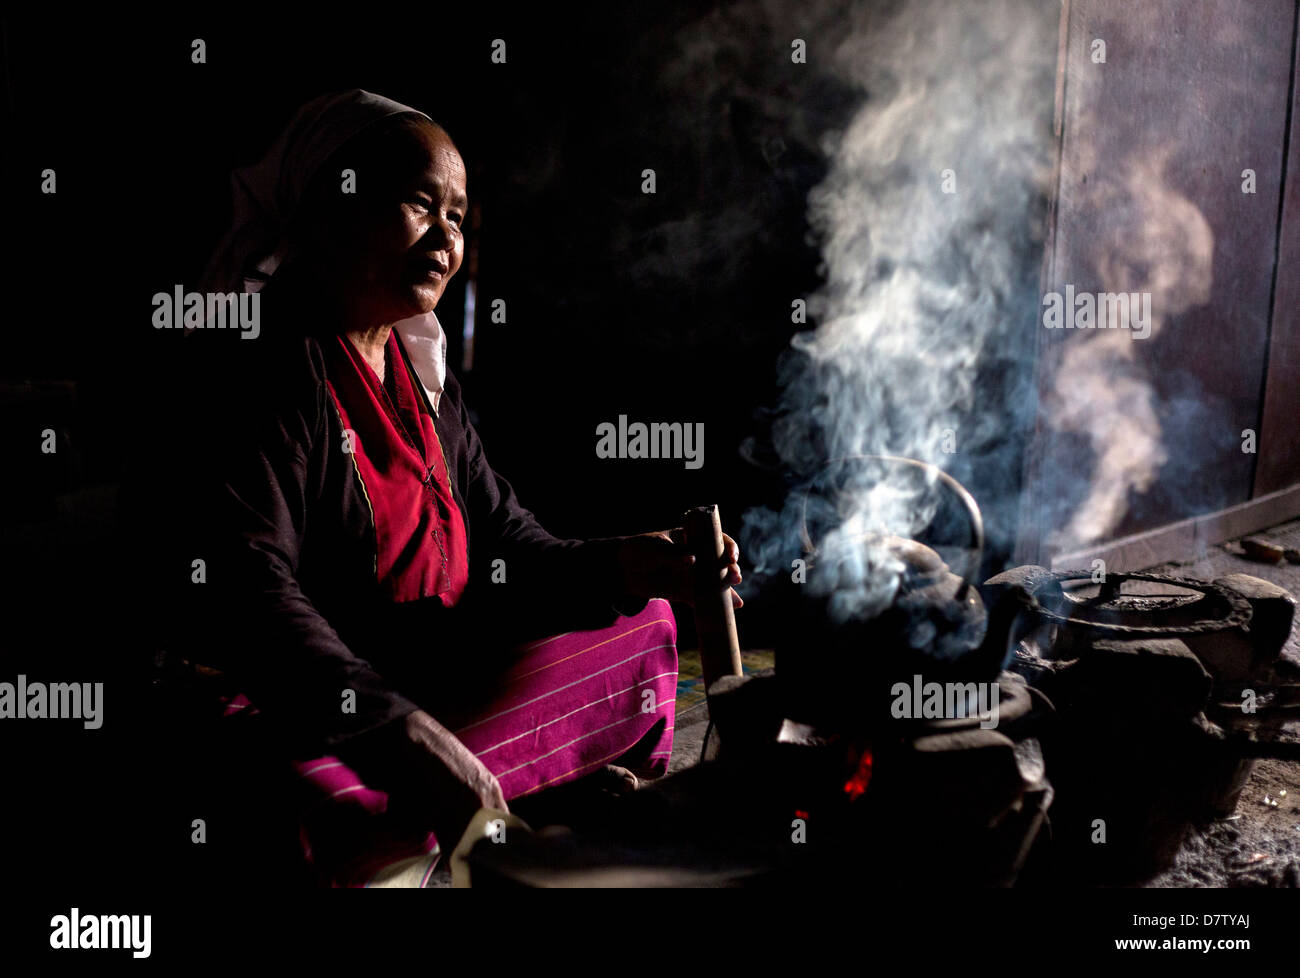 Woman of the Palaung tribe cooking on open fire in her home in village near Kengtung (Kyaingtong), Shan State, Burma Stock Photo